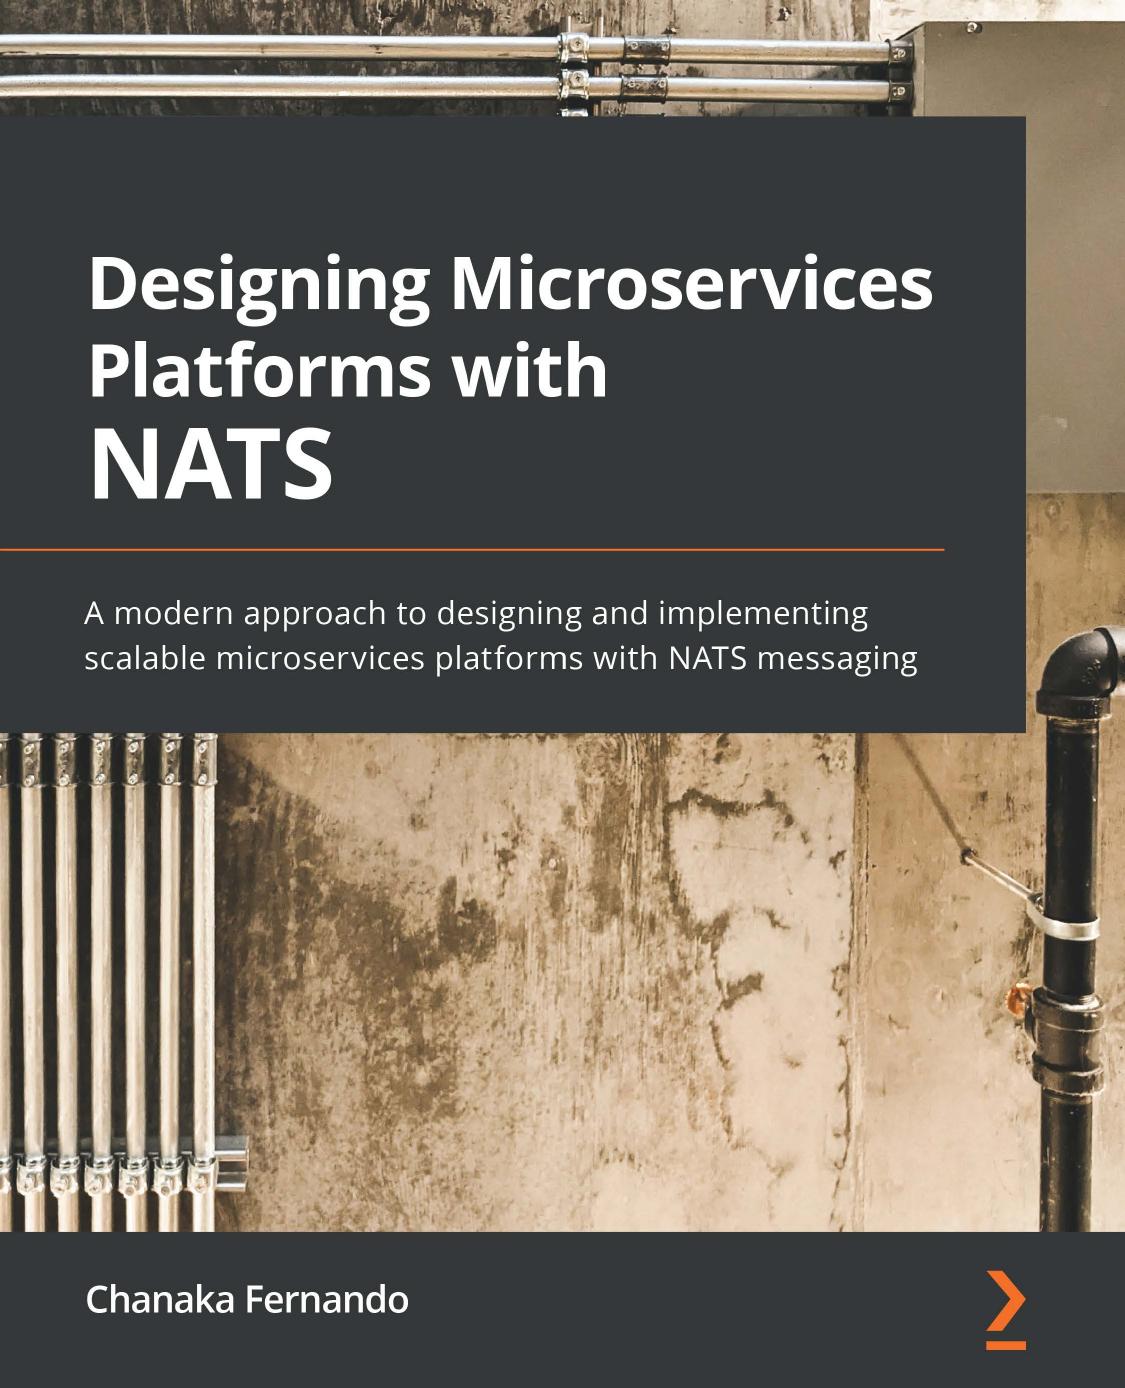 Designing Microservices Platforms With NATS: A Modern Approach to Designing and Implementing Scalable Microservices Platforms With NATS Messaging